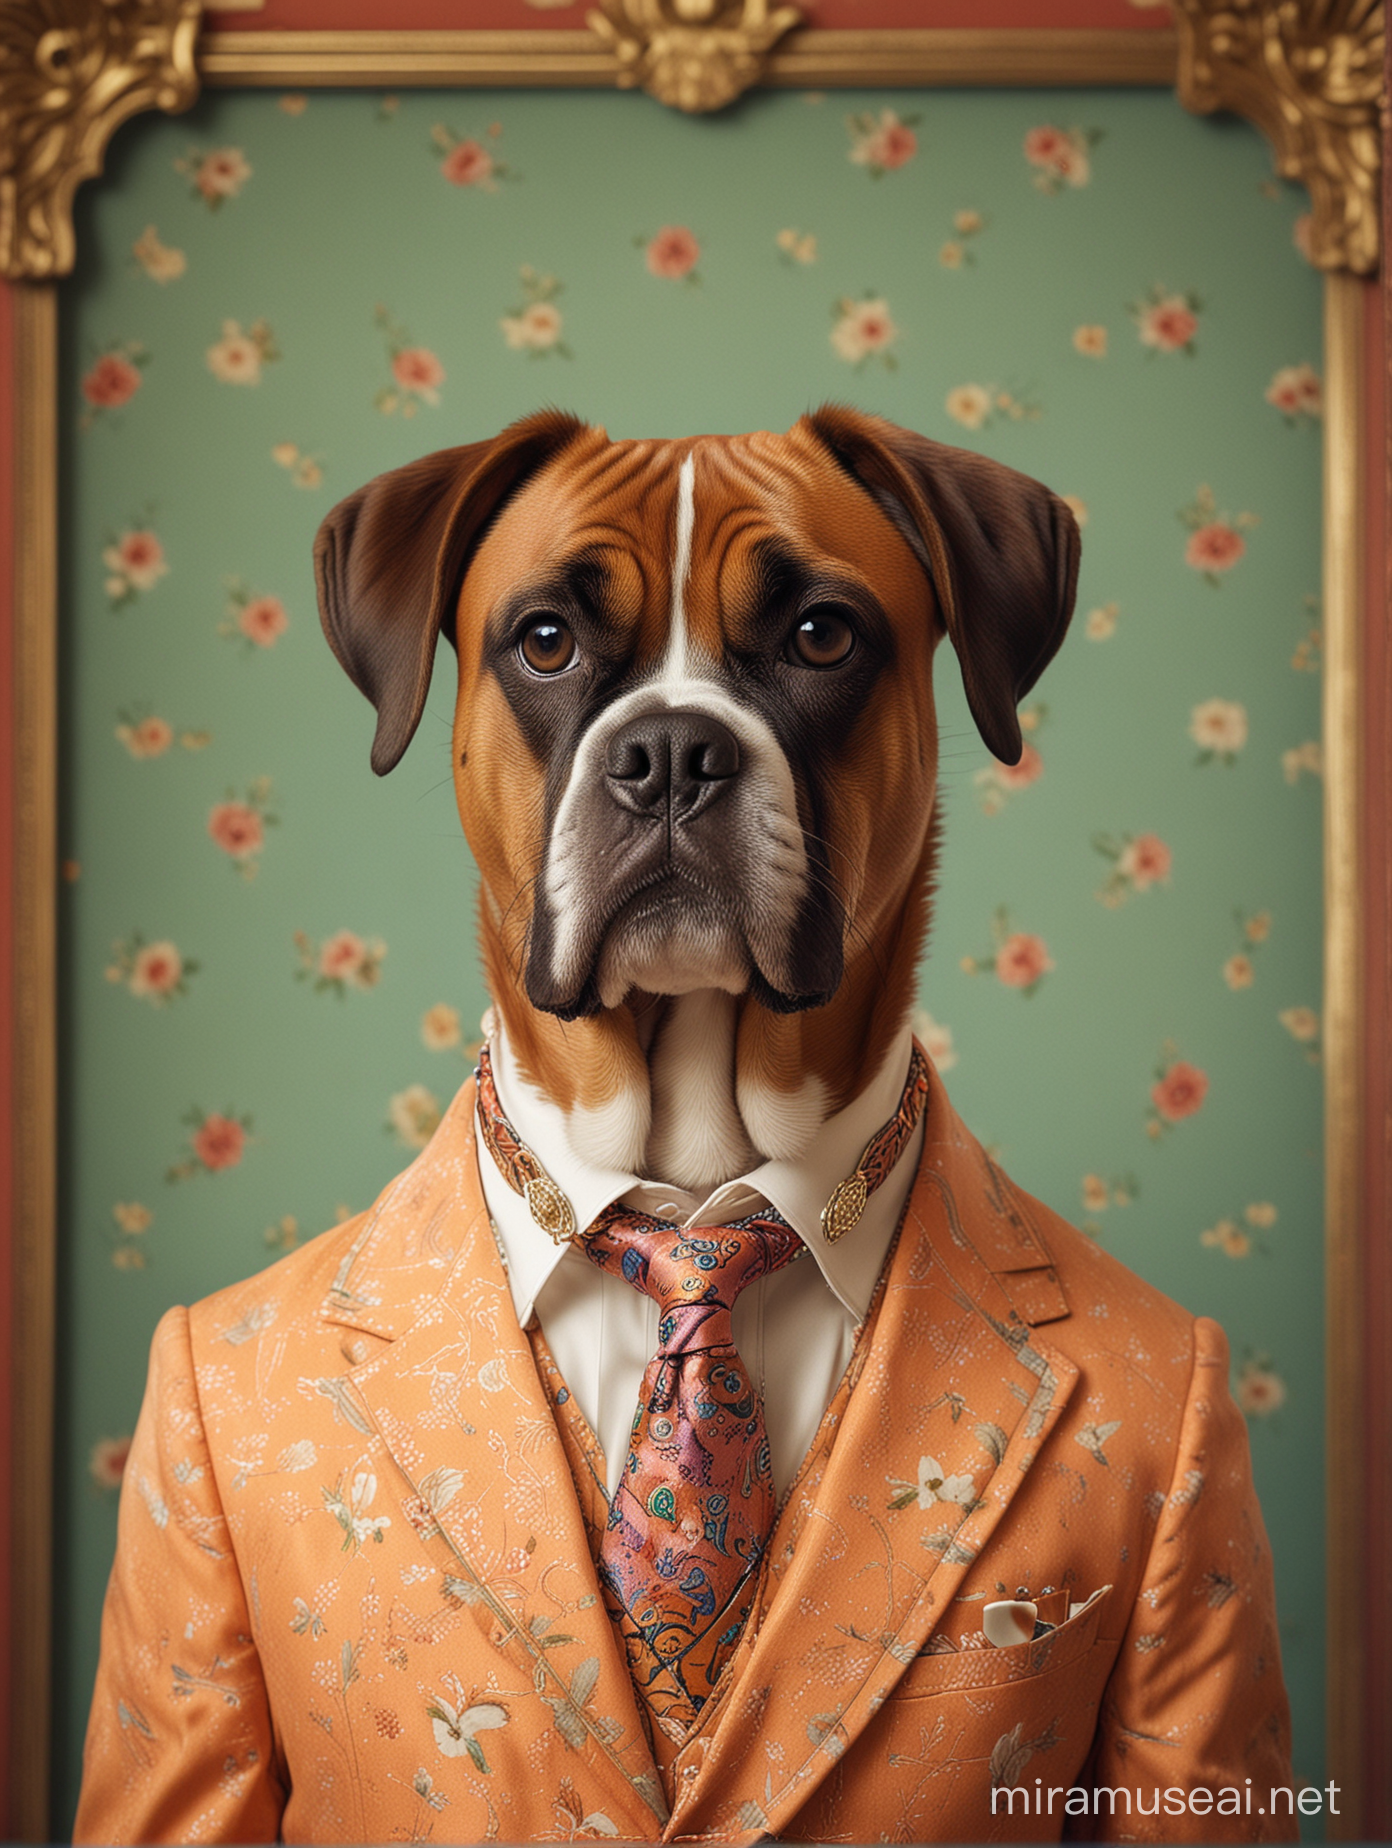 Boxerdog, realistic, f1.8 aperature photo, dressed formally, colorful ornate background, in the quirky graphic style of Wes Anderson, --no humans, text, blur --v 6